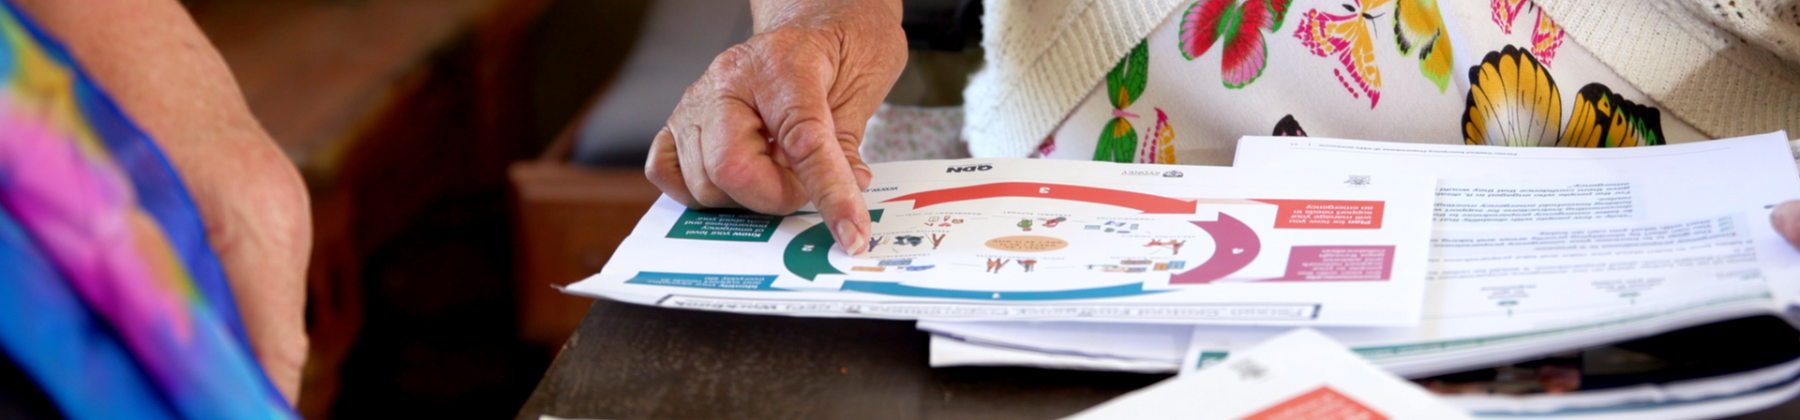 Picture contains a photograph of a carer working through P-CEP documentation for a person with disability.